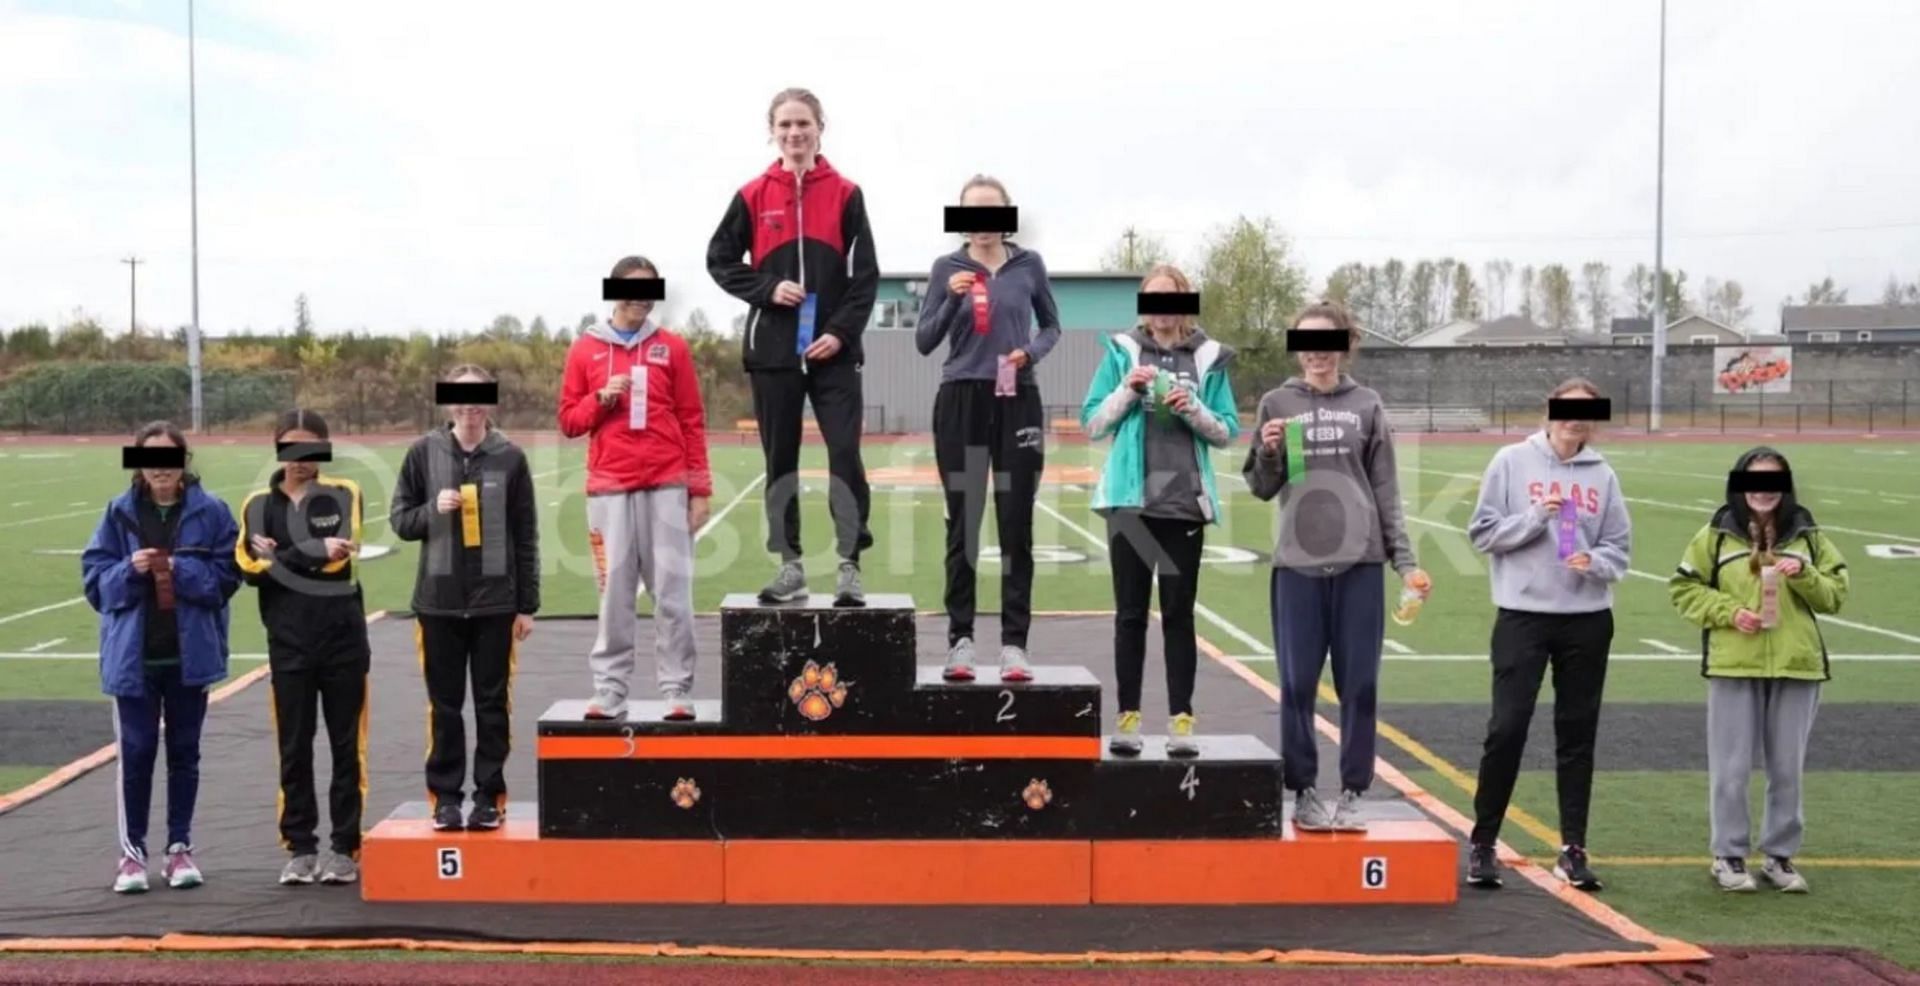 Biological male competes and wins first place in cross country tournament (Image via libsoftiktok/Twitter)